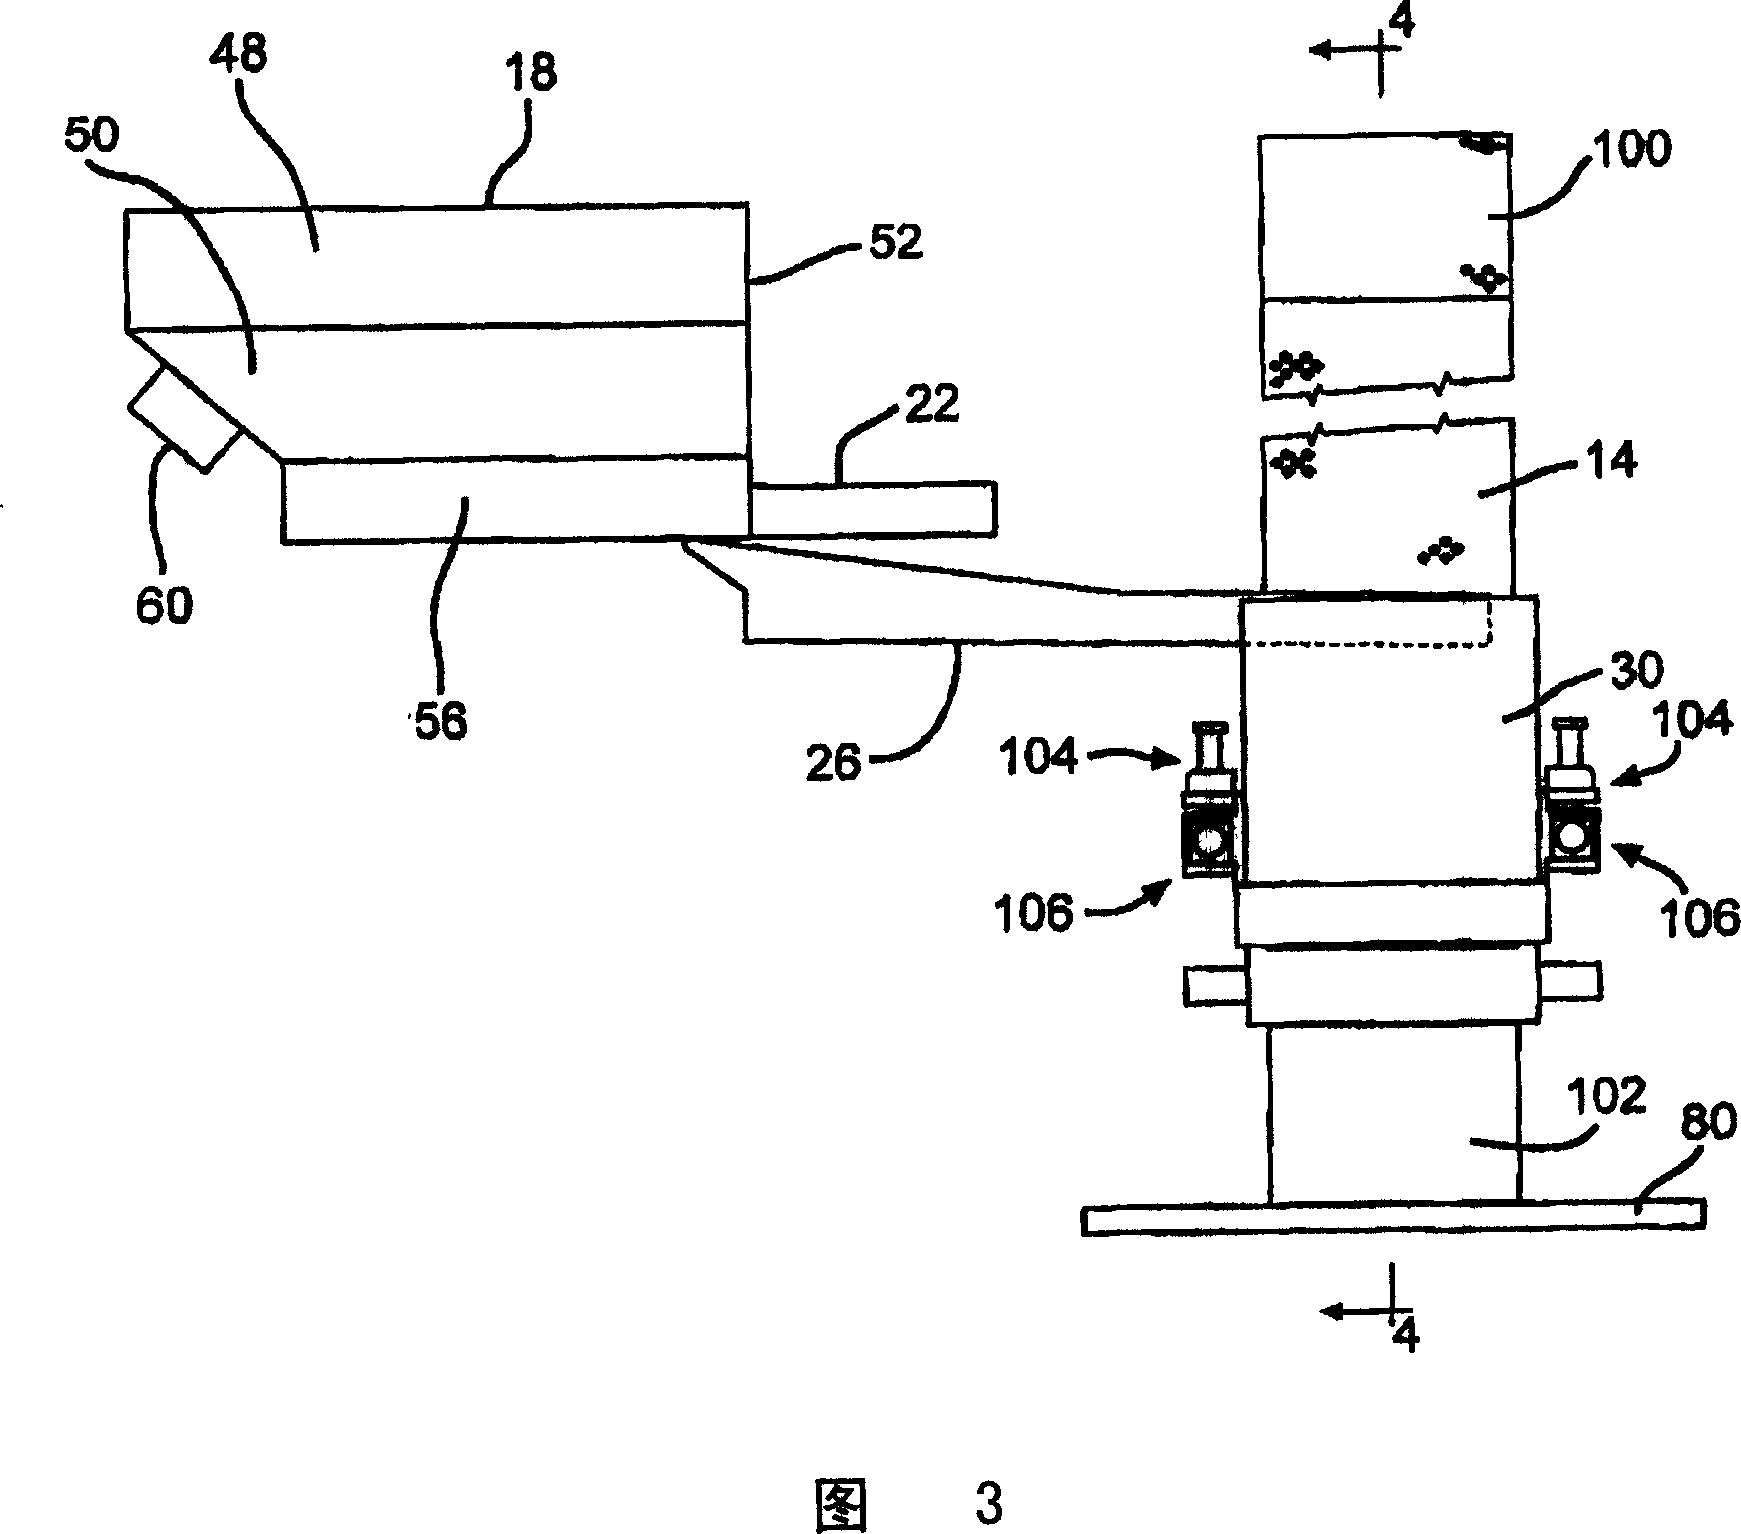 Apparatus and method for fabricating cathode collectors for lithium/oxyhalide electrochemical cells